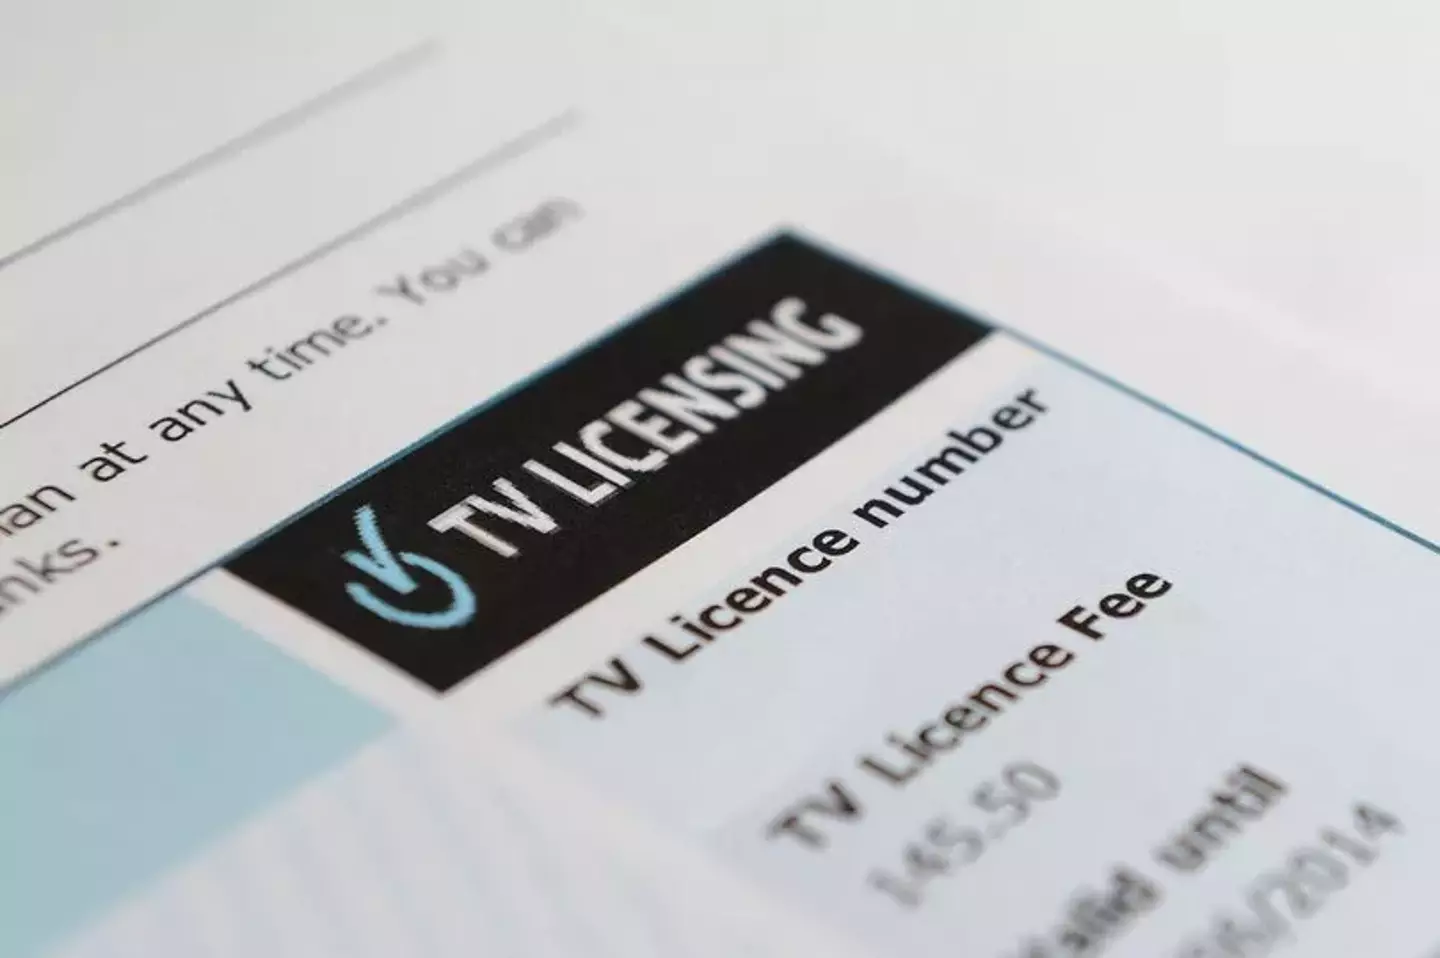 A letter from TV Licensing.